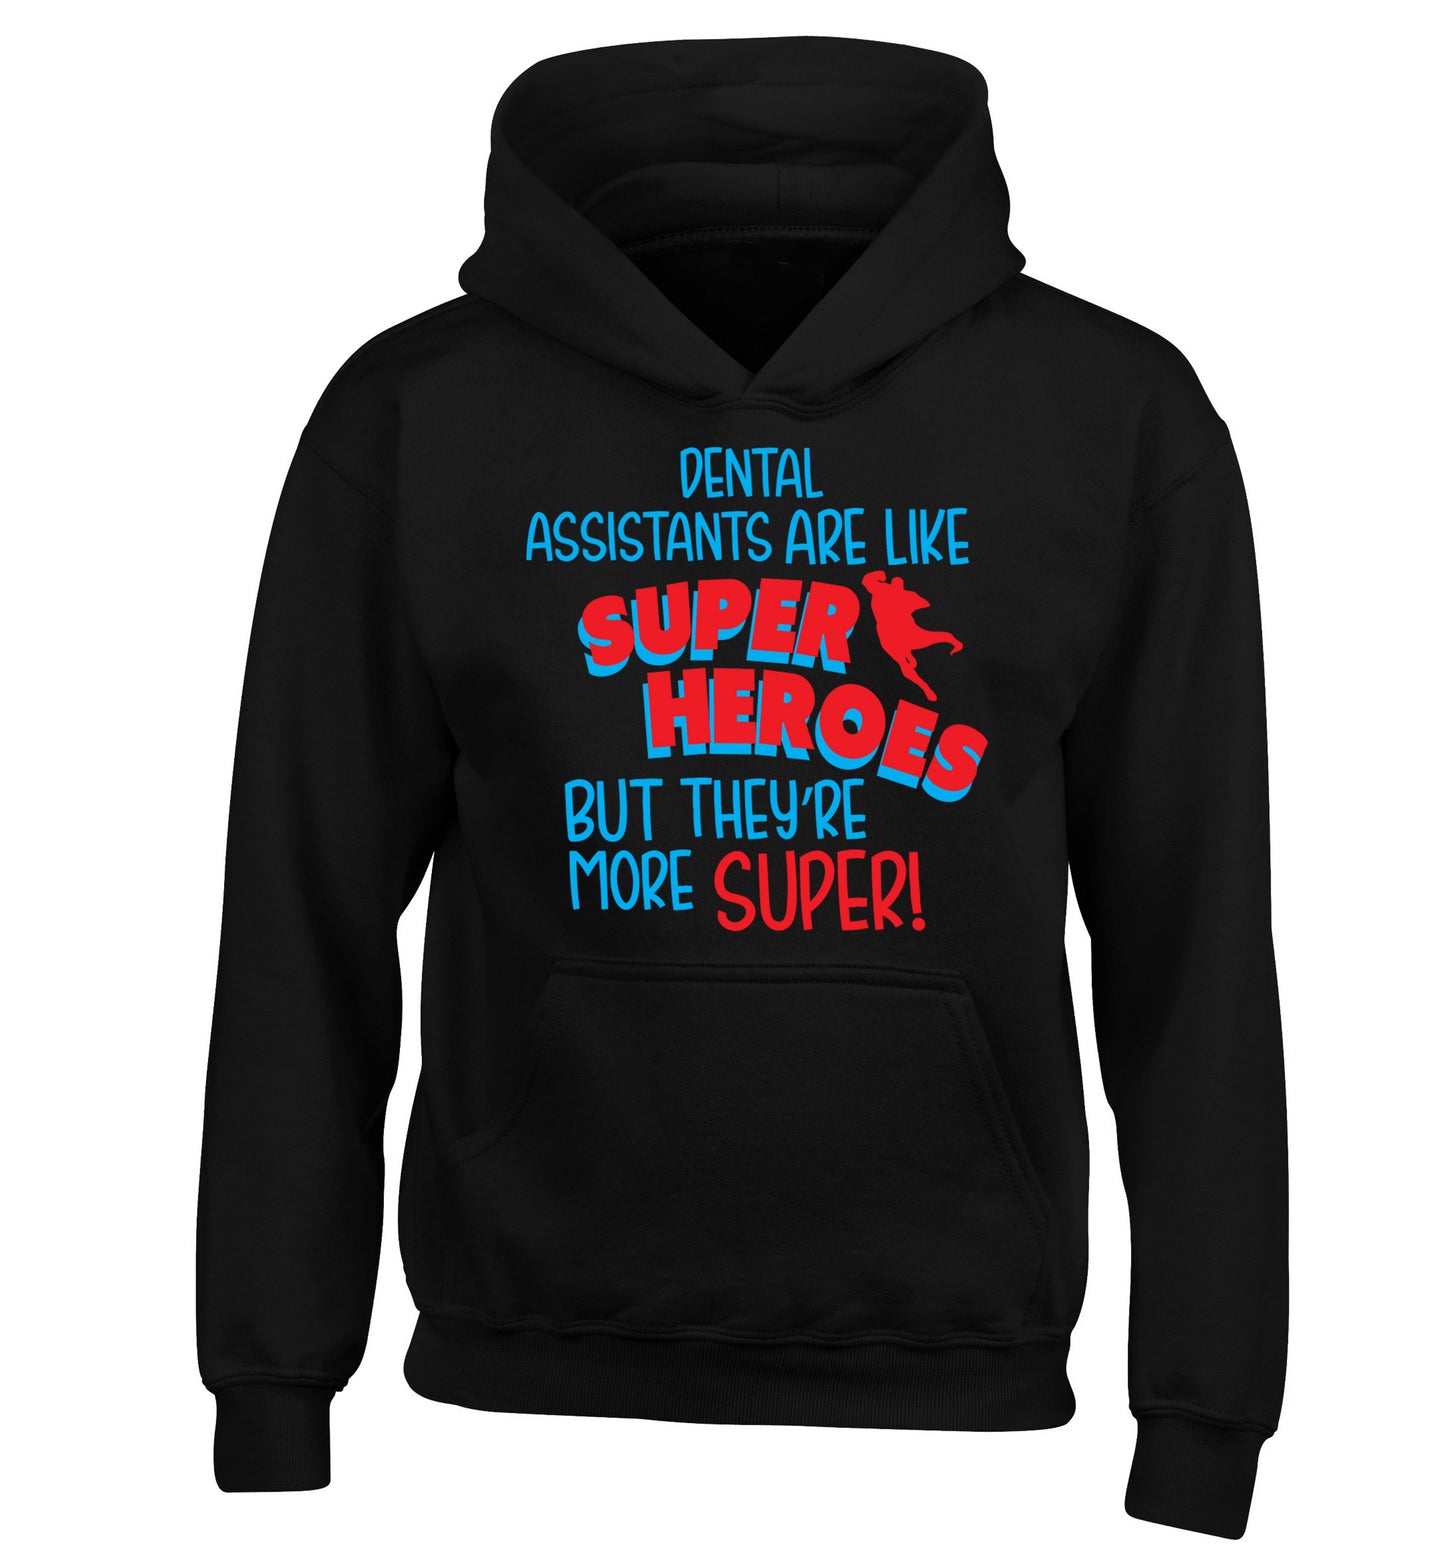 Dental Assistants are like superheros but they're more super children's black hoodie 12-13 Years